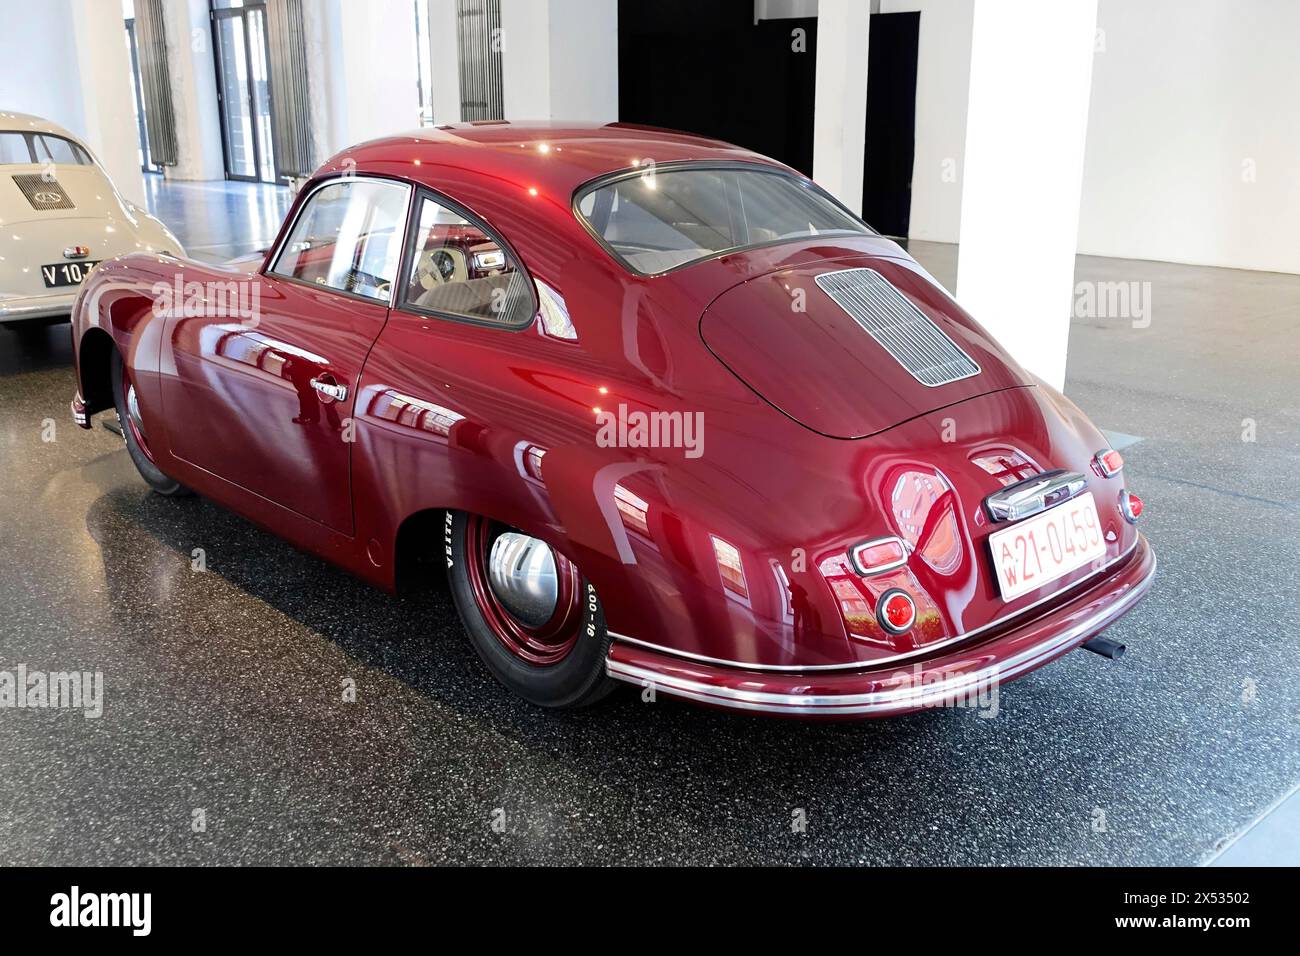 Rear view of a red Porsche 356 Coupe, exhibited in a car museum, AUTOMUSEUM PROTOTYP, Hamburg, Hanseatic City of Hamburg, Germany Europe Stock Photo